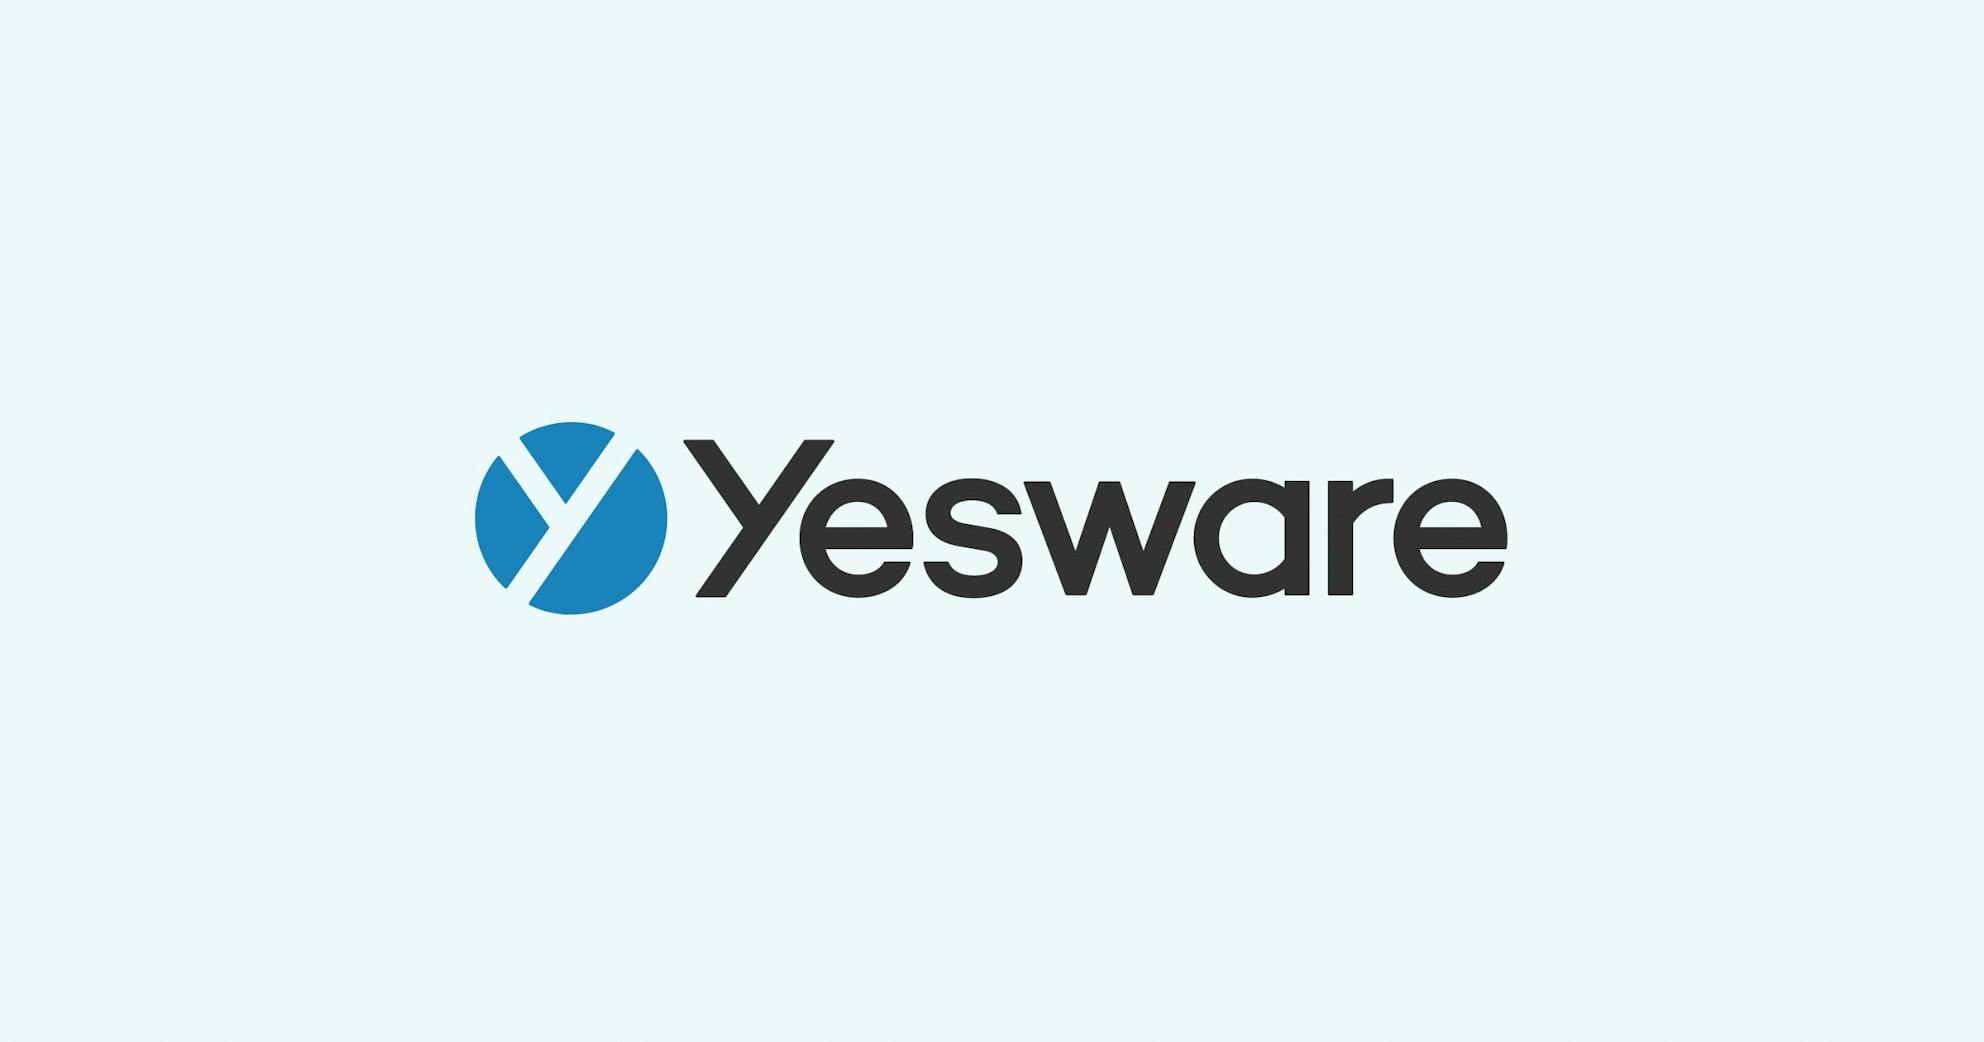 September is the Coolest Month for Yesware